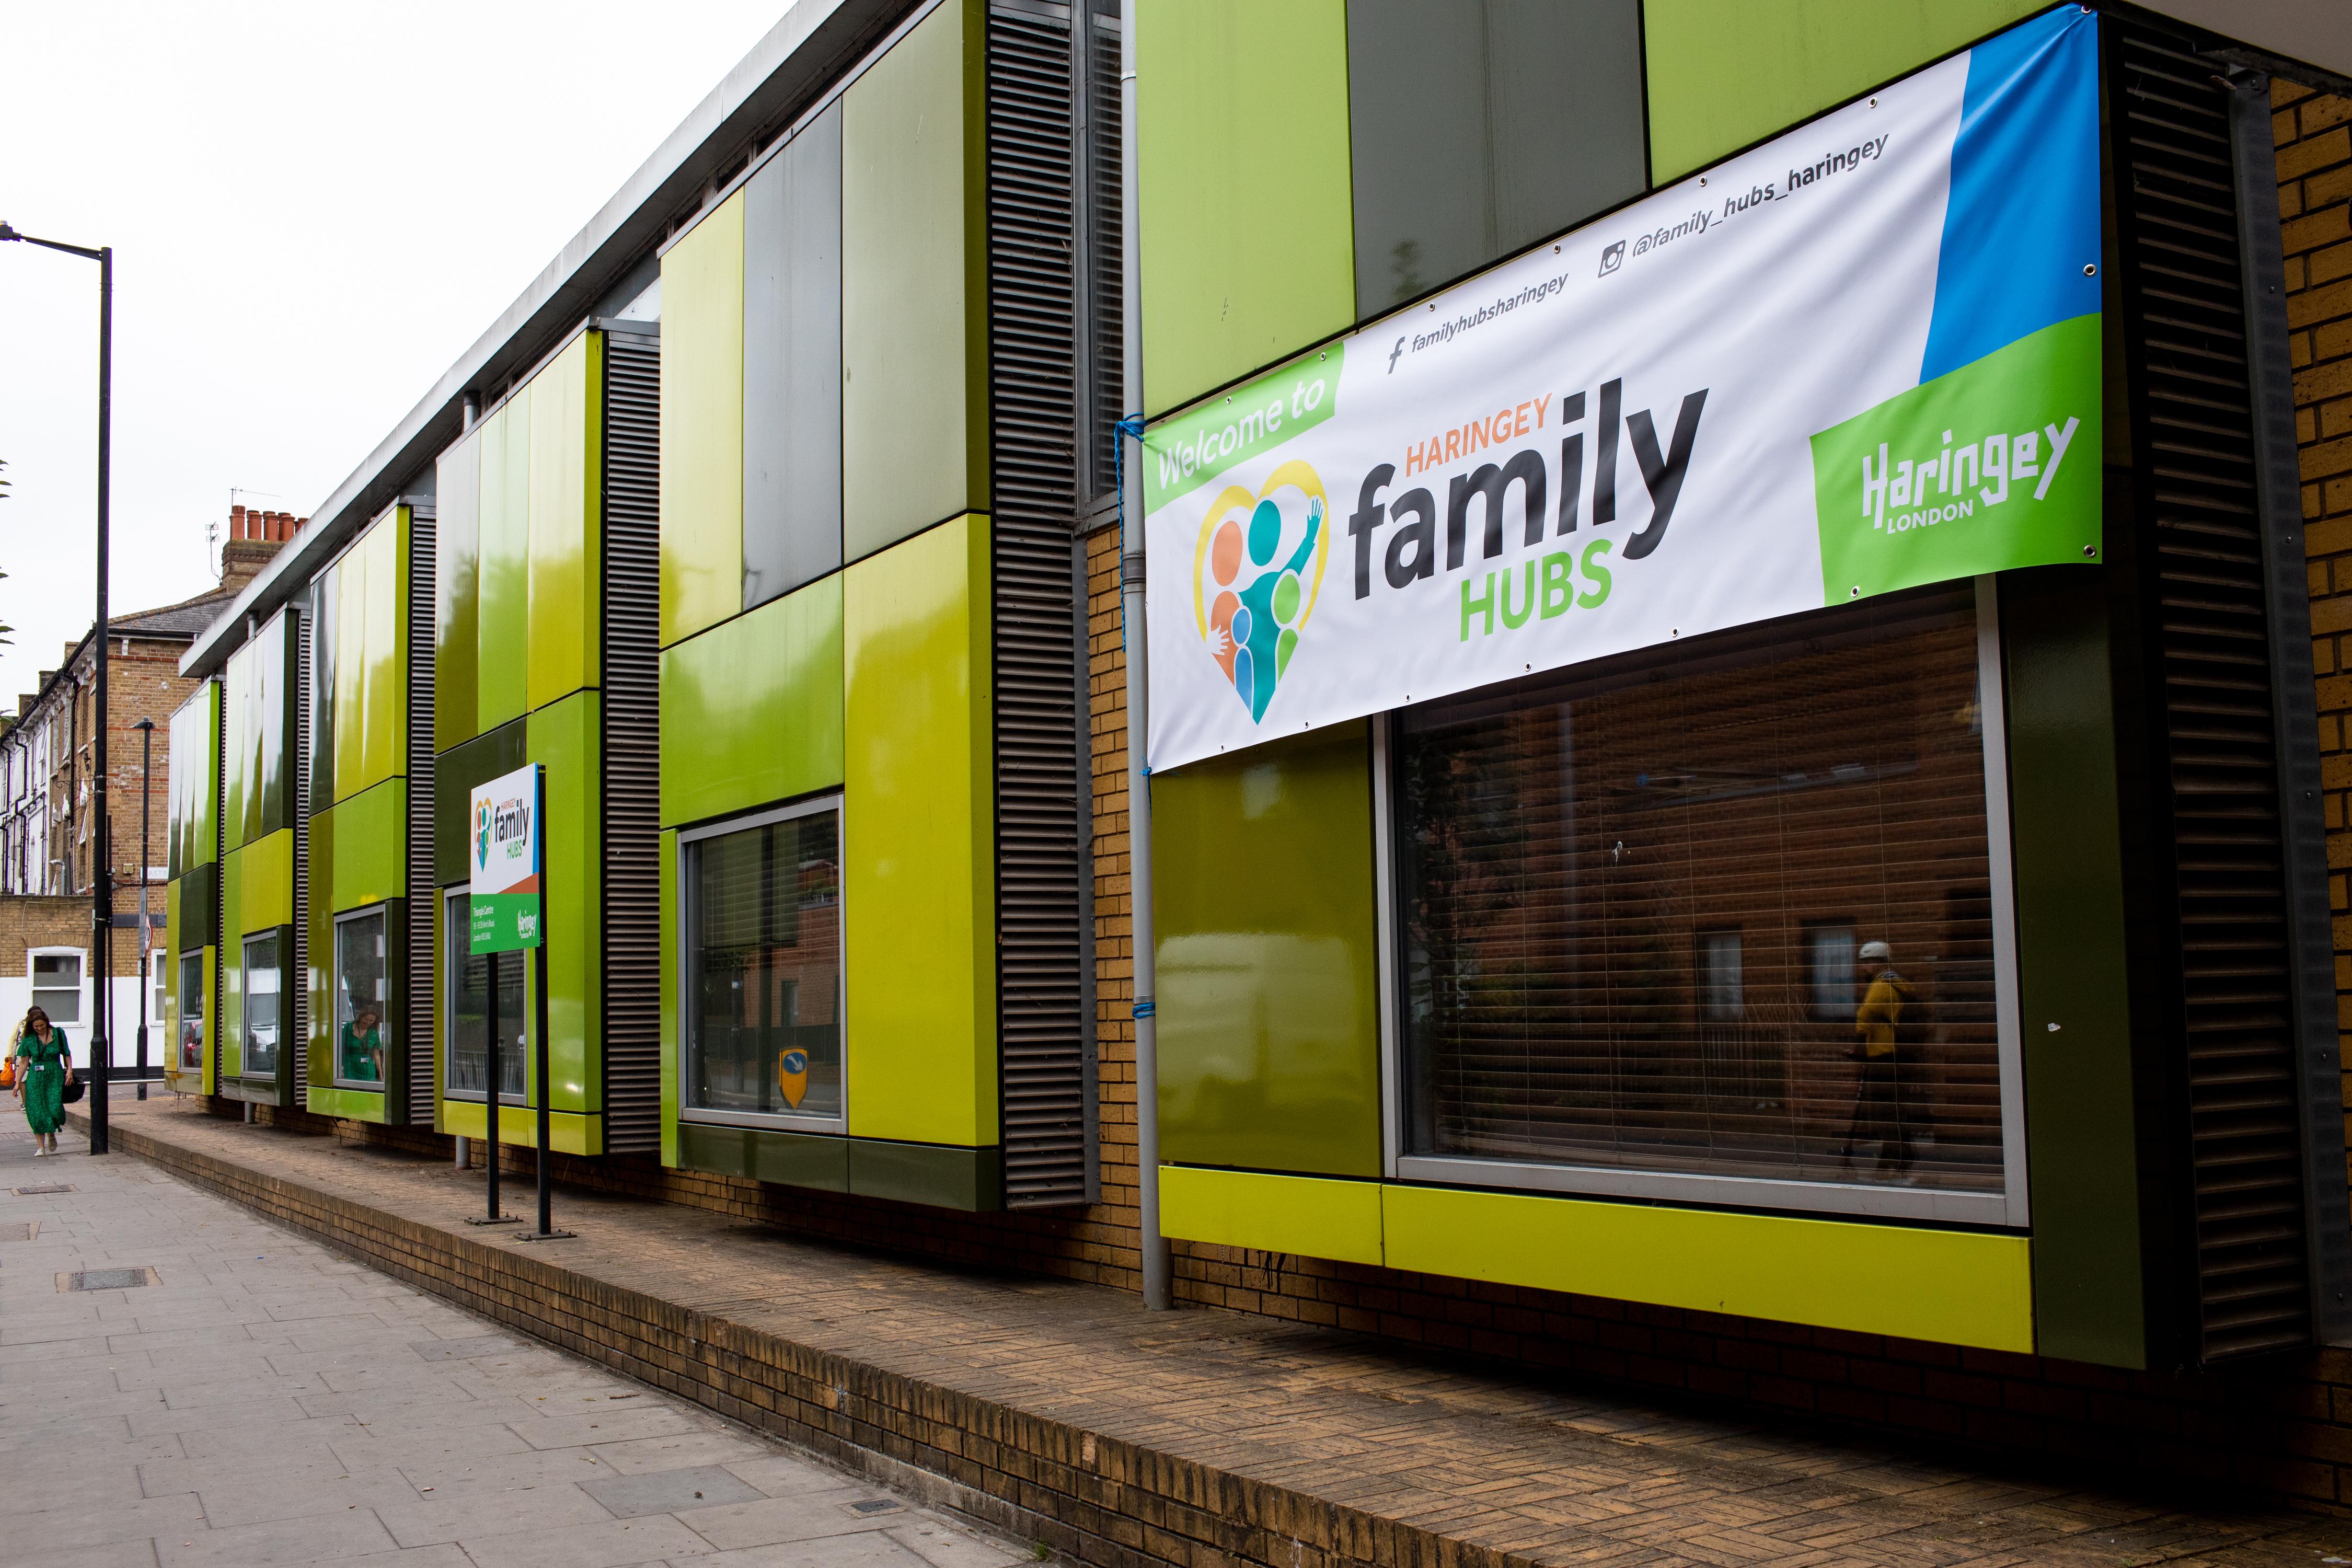 The pic is of Haringey's first-ever family hub at the Triangle Centre, 91 – 93 St Ann’s Road, N15 6NU during its official launch event.